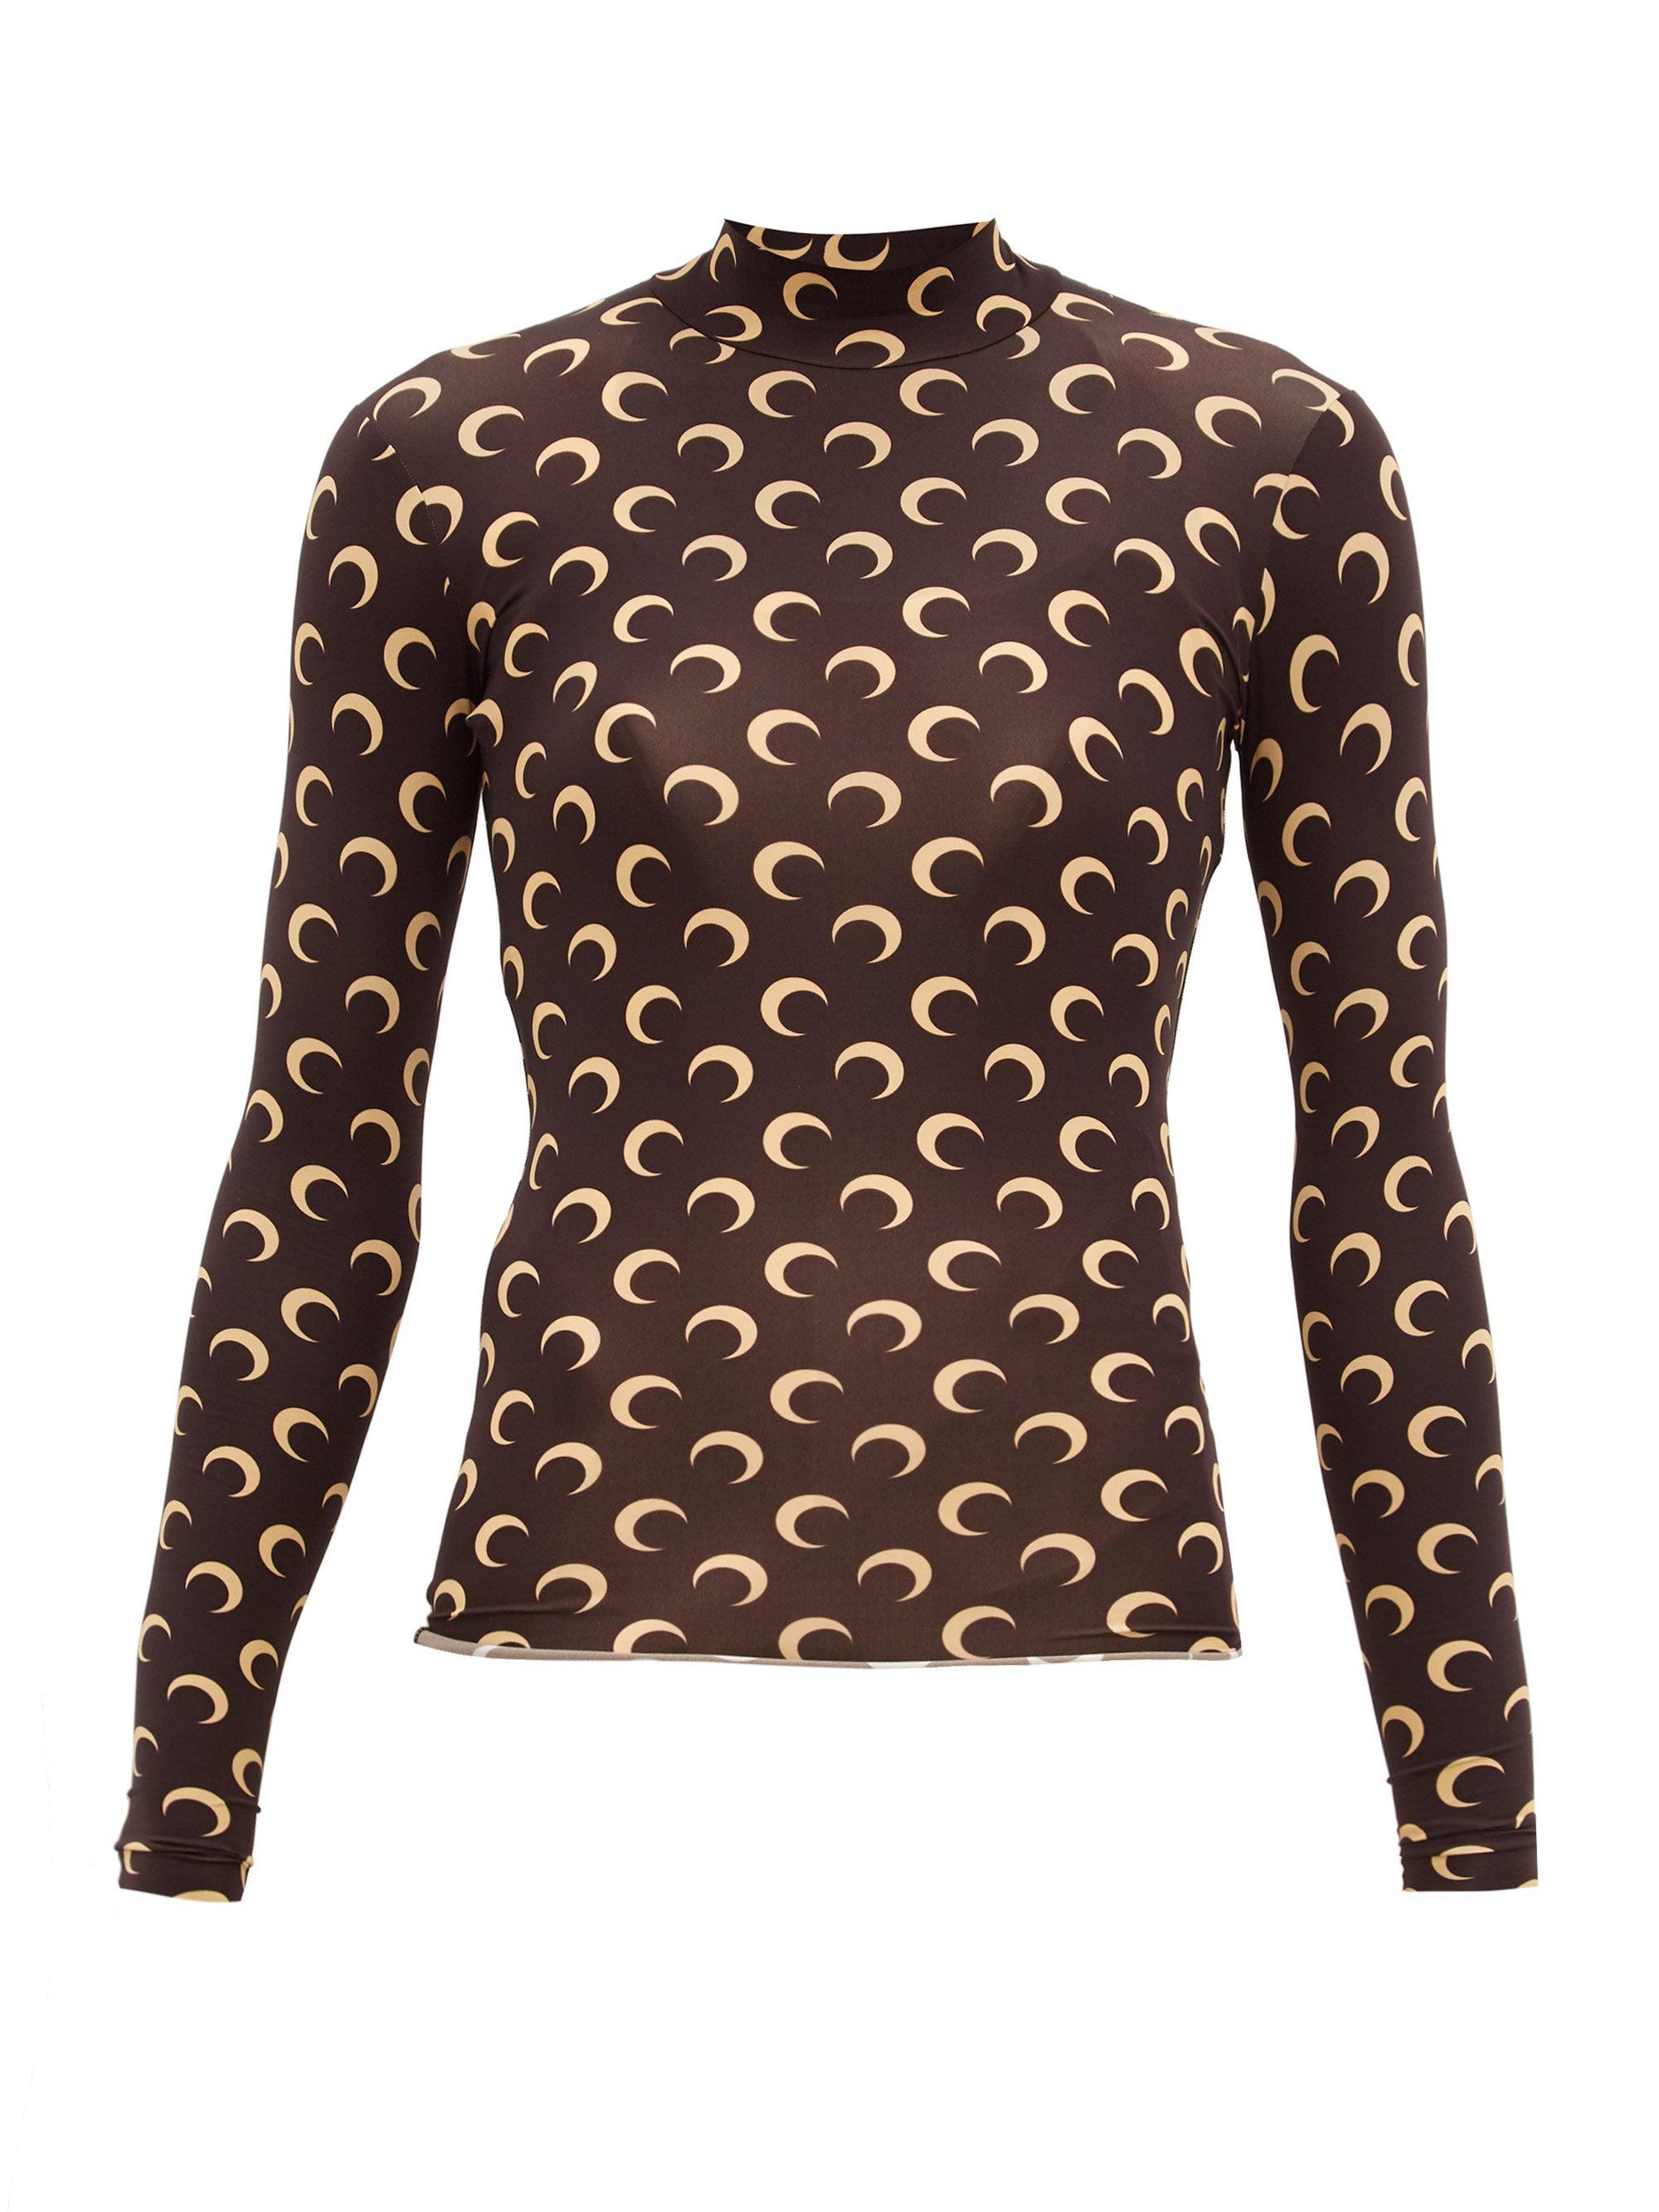 Marine Serre Crescent Moon-print Stretch-jersey Top in Brown - Lyst